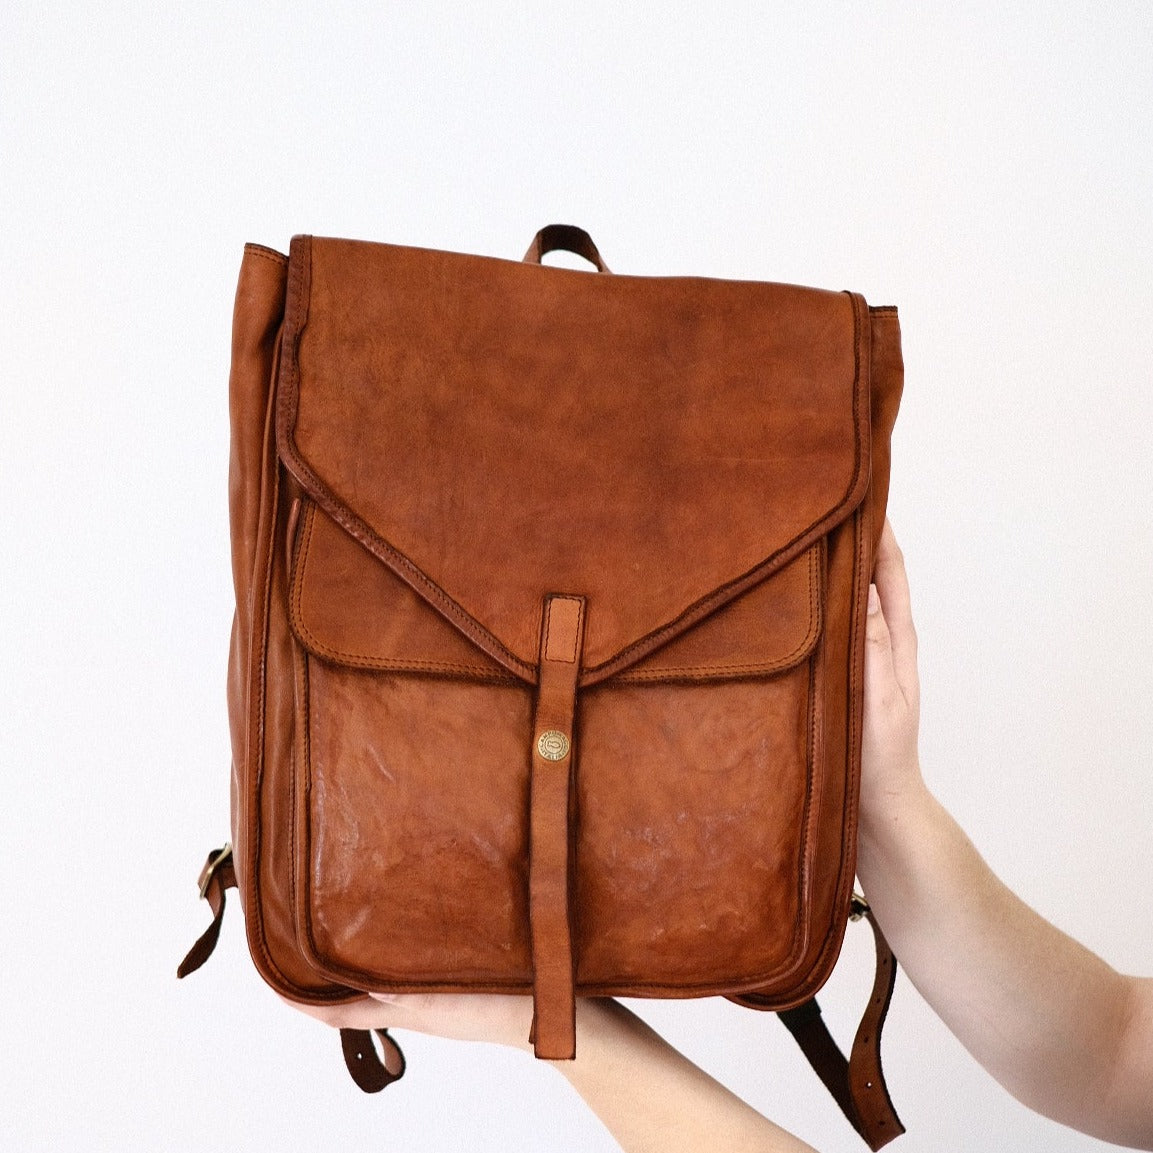 Orleans Backpack in Cognac - Campomaggi